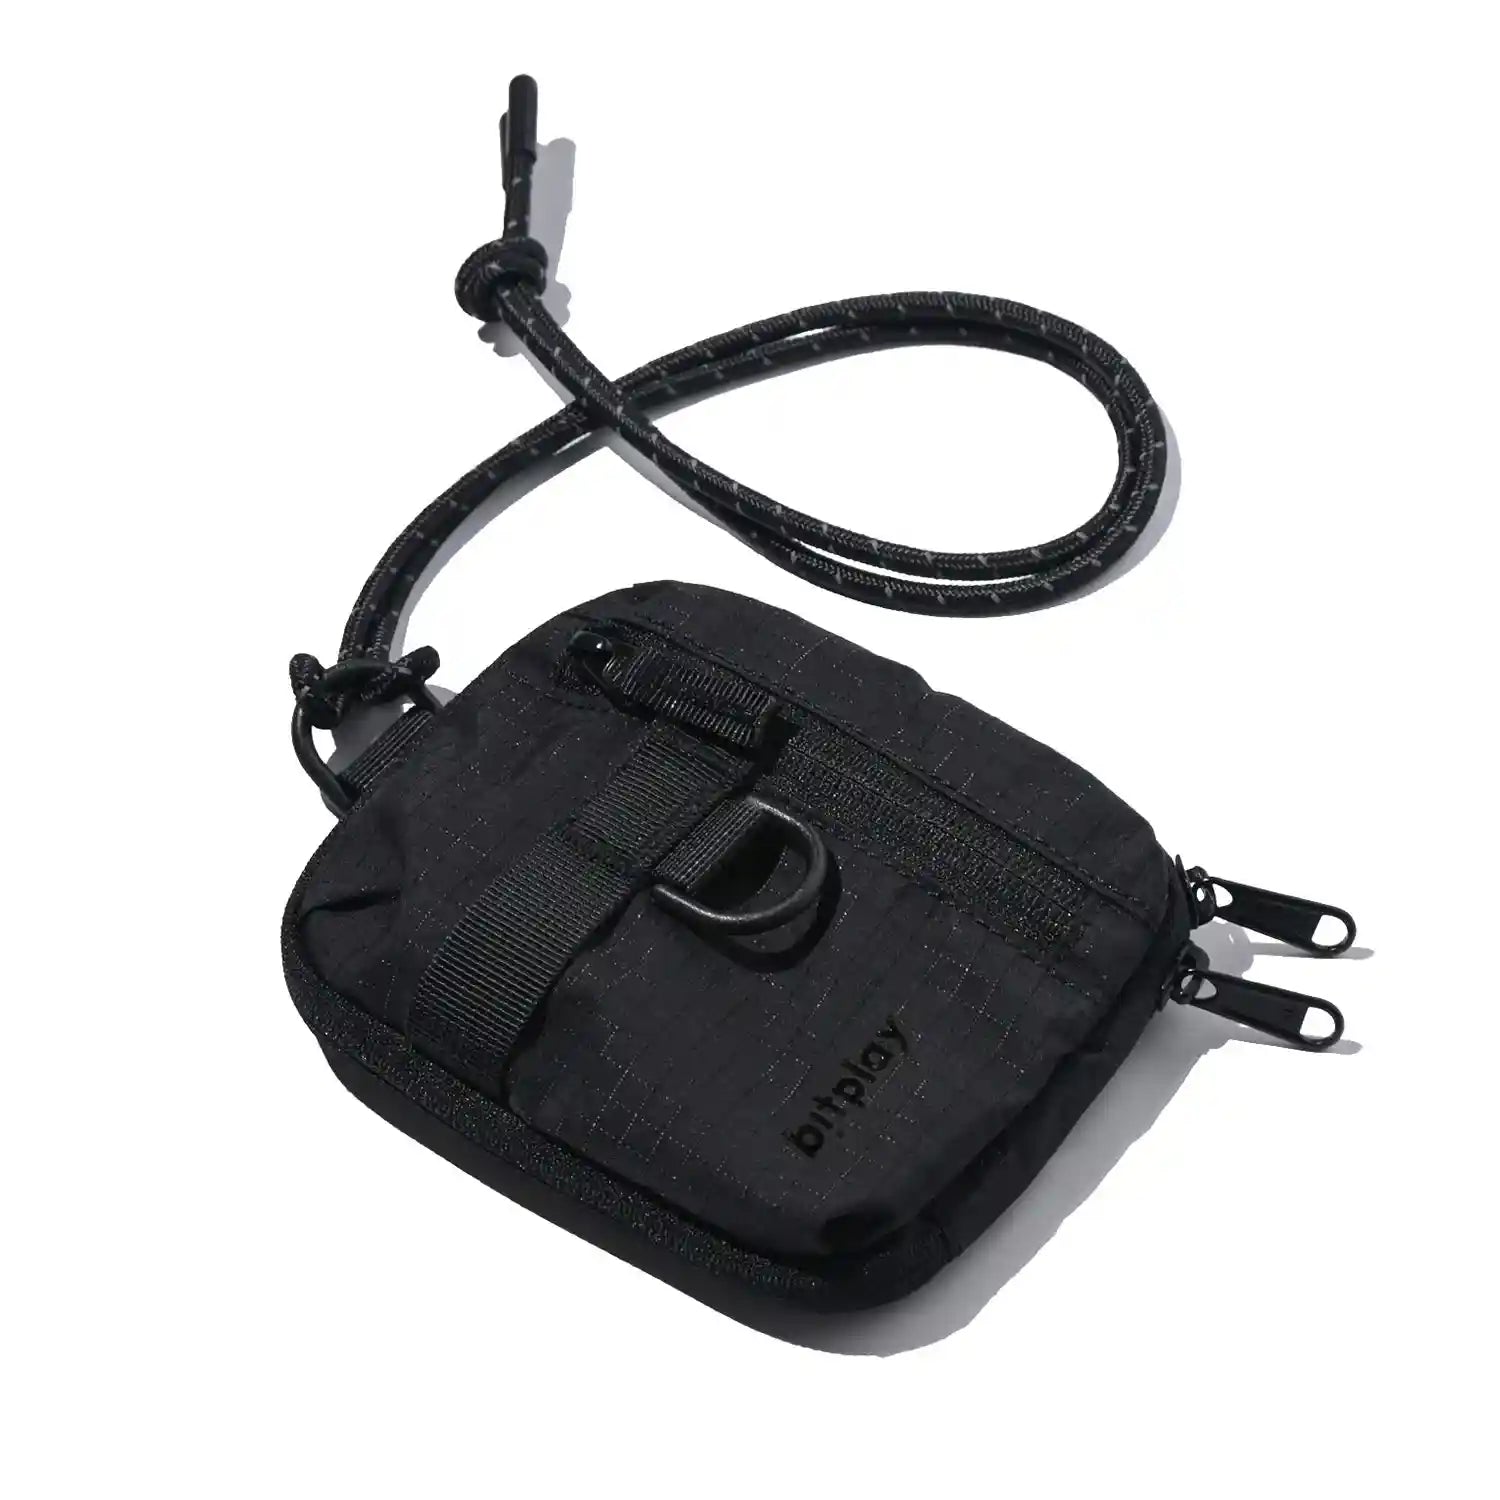 Bitplay CORDURA Fabric Essential Pouch V2 (with lanyard)